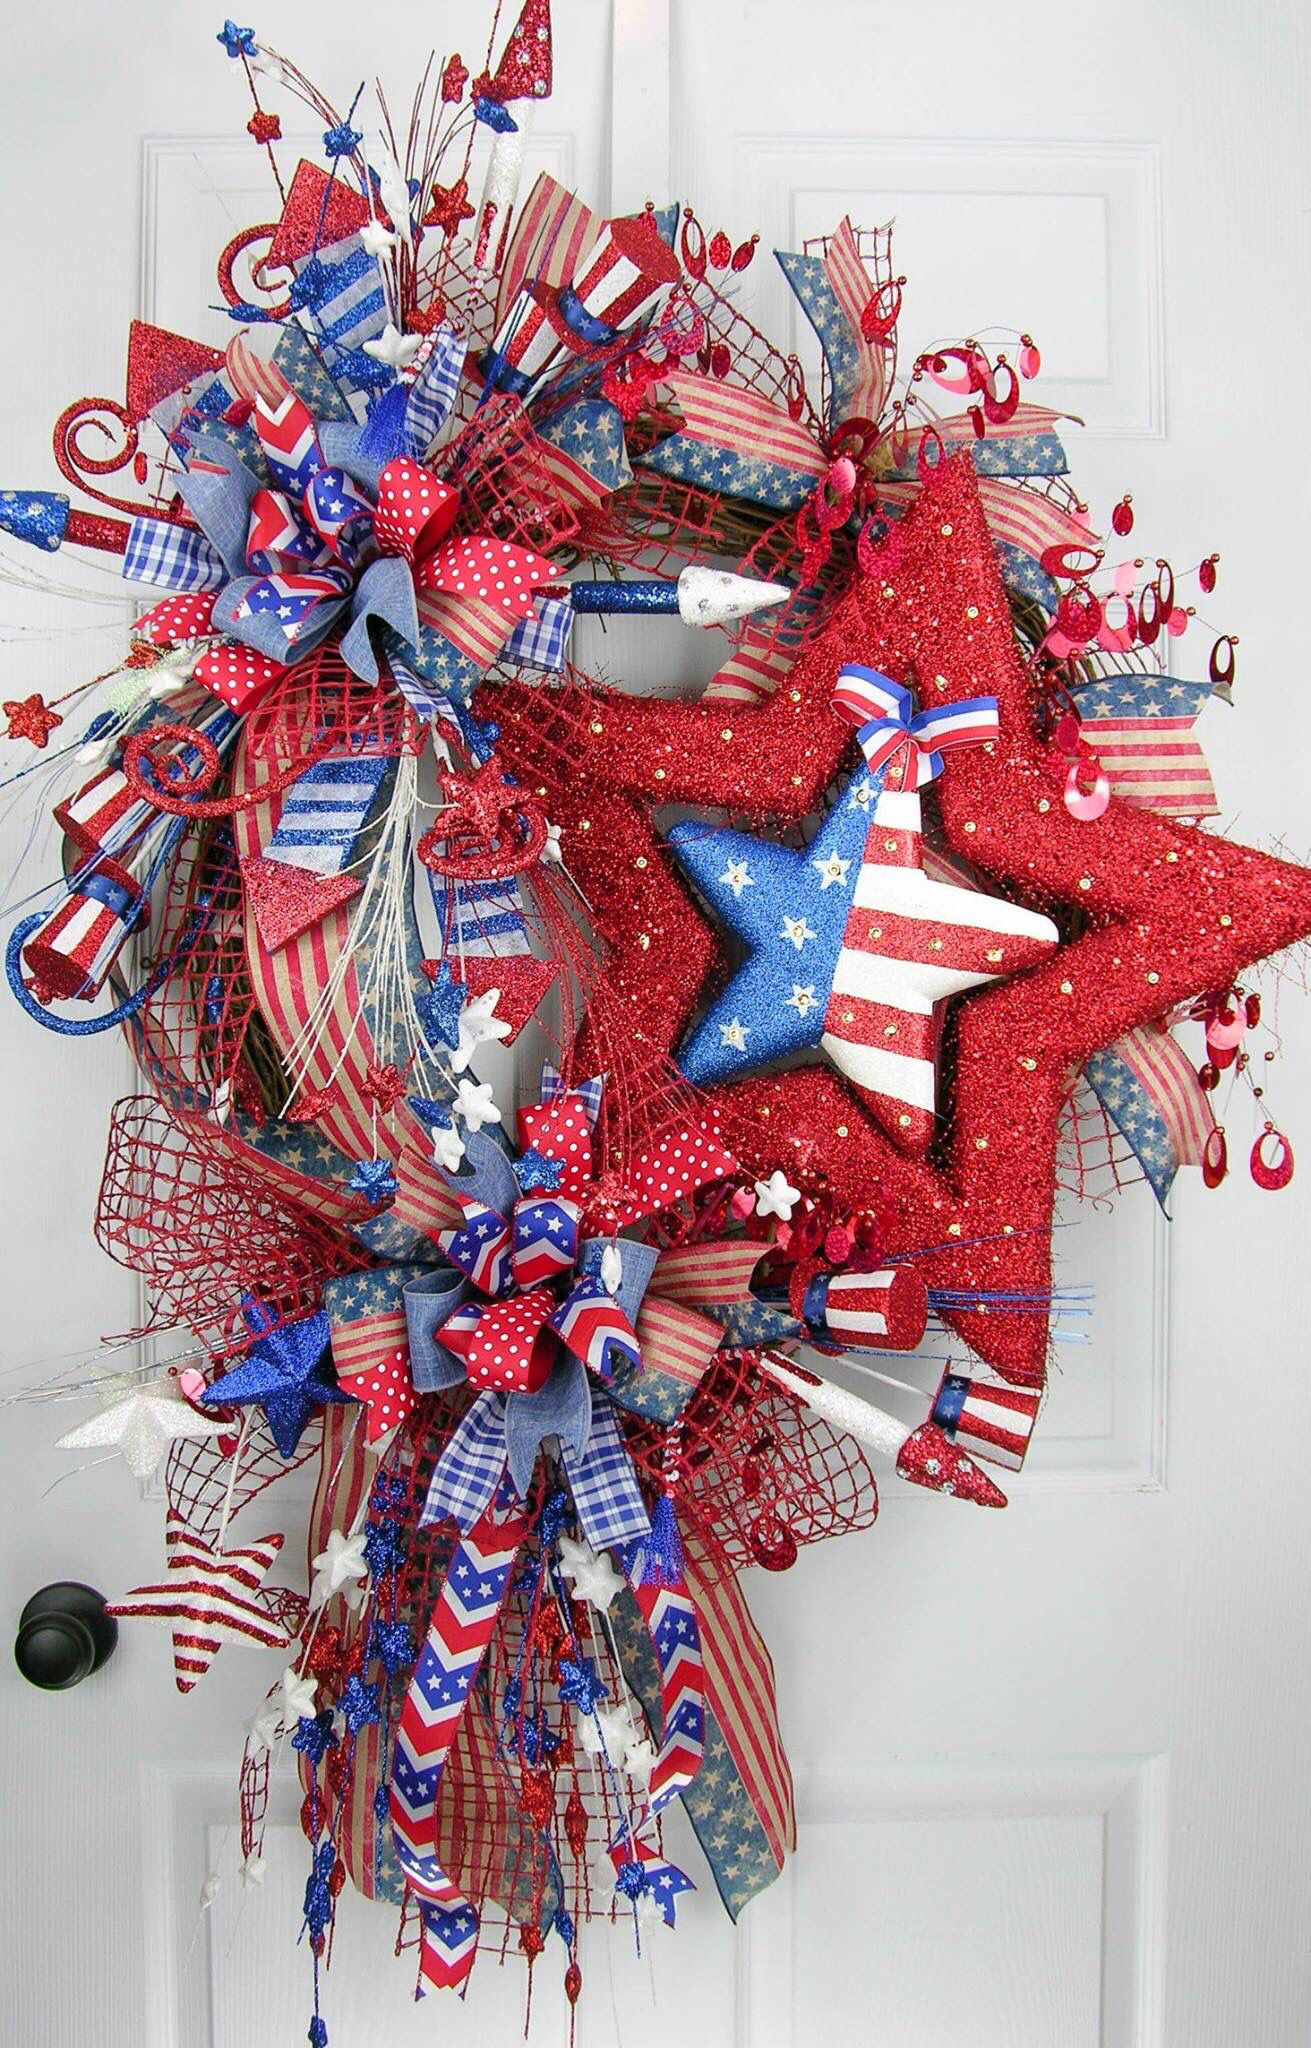 Memorial Day Wreath Ideas
 Patriotic Wreath Memorial Day 4th of July with lights and